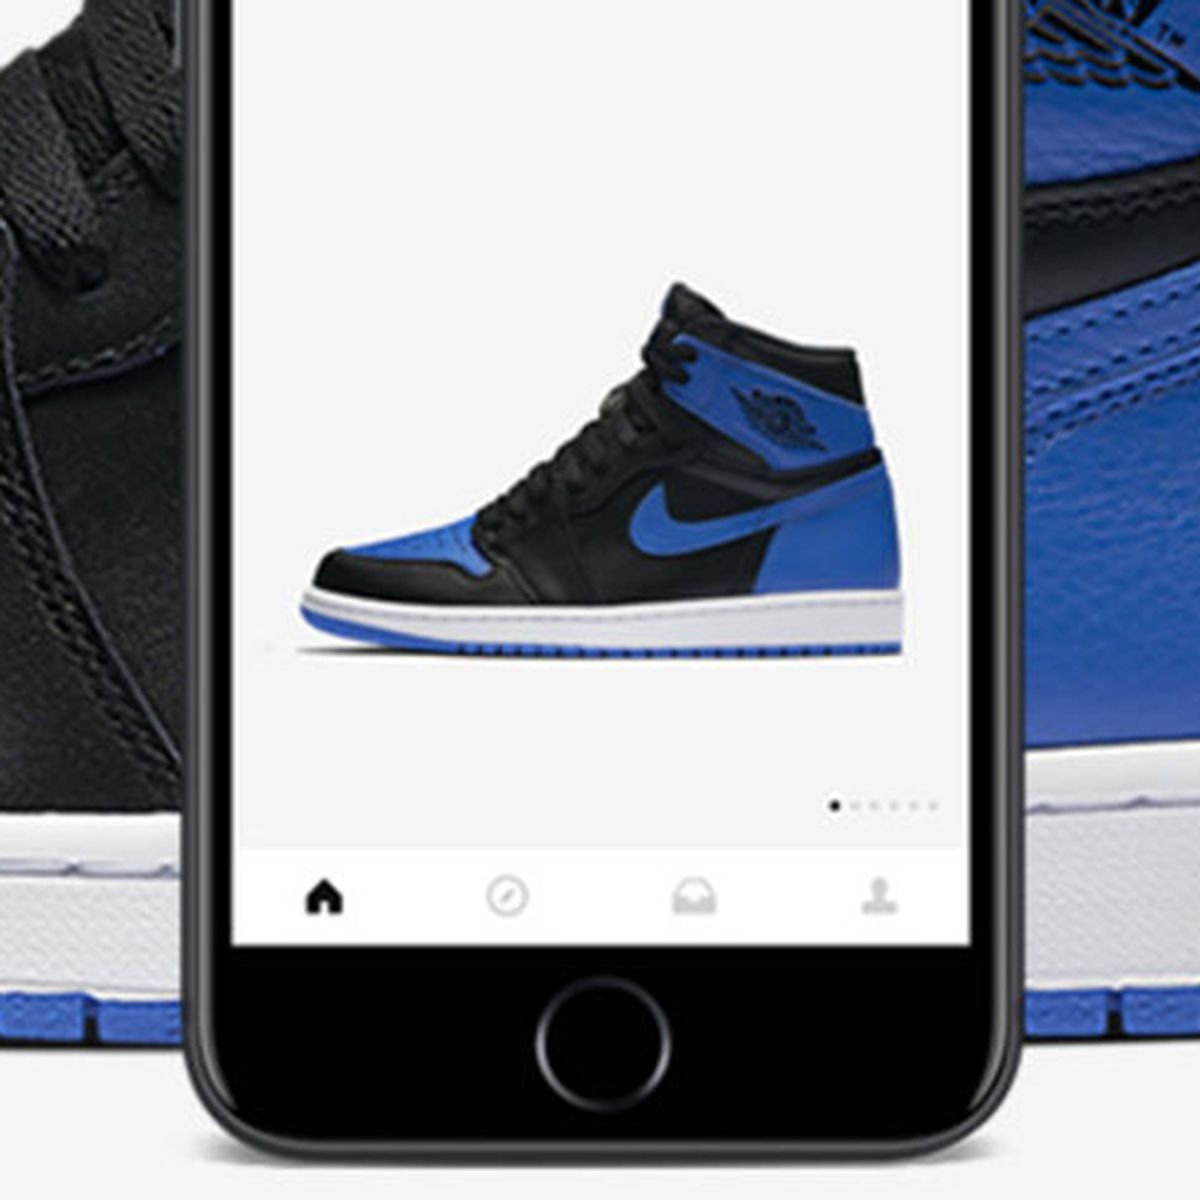 Want 'Exclusive Access' on Nike SNKRS? Here's How You Can Get It Sneaker Freaker